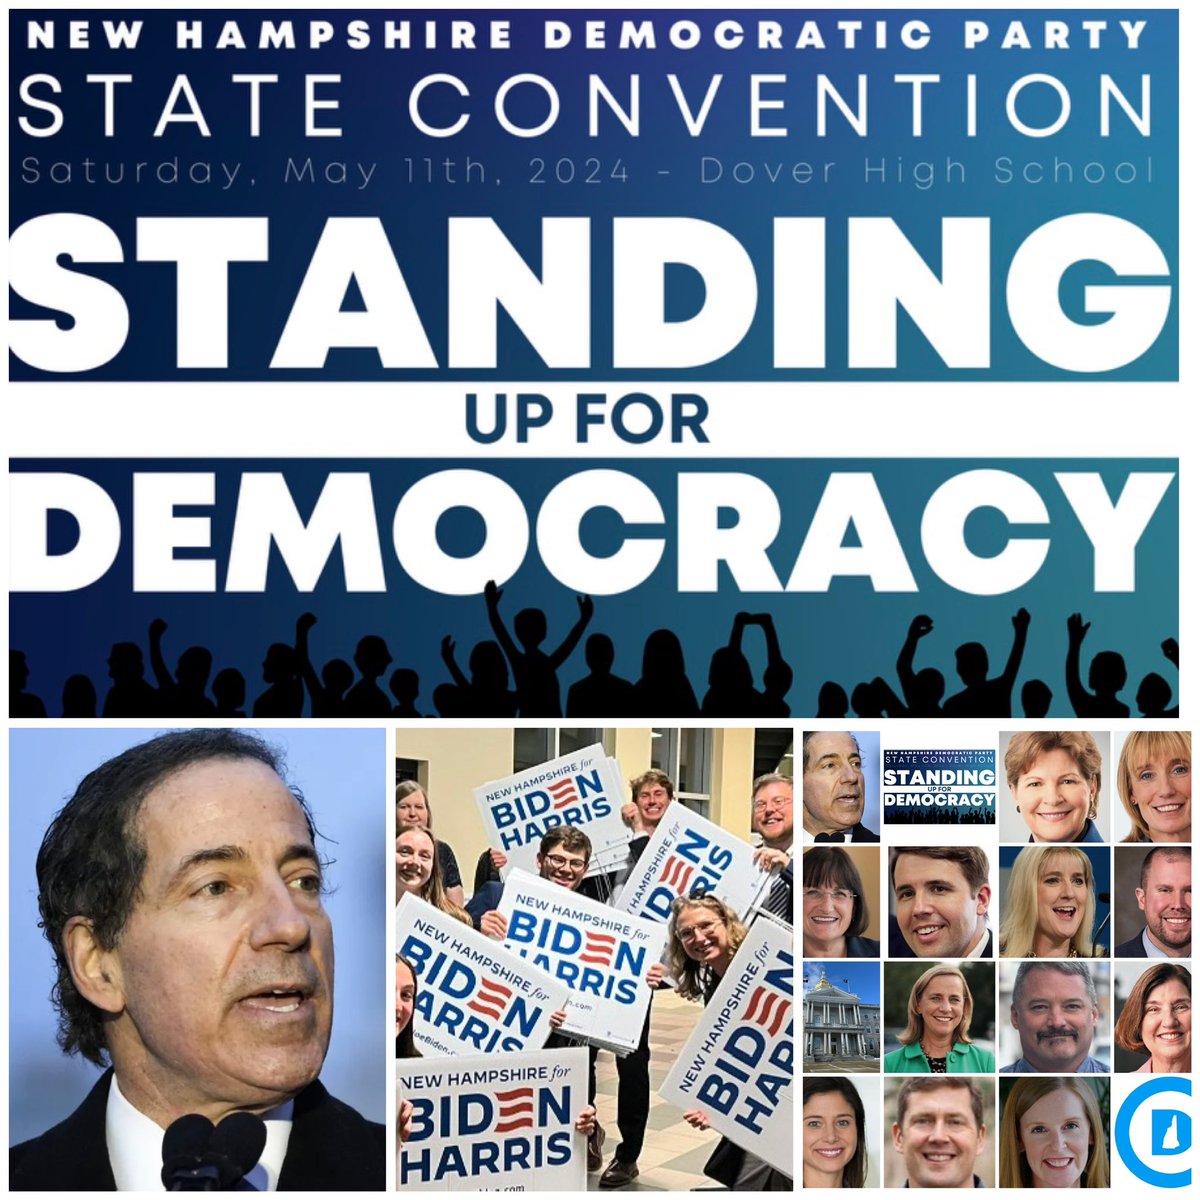 Jamie Raskin will be standing up for democracy on Saturday, will you be there to stand with him? Democracy is on the ballot in November. #NHPolitics